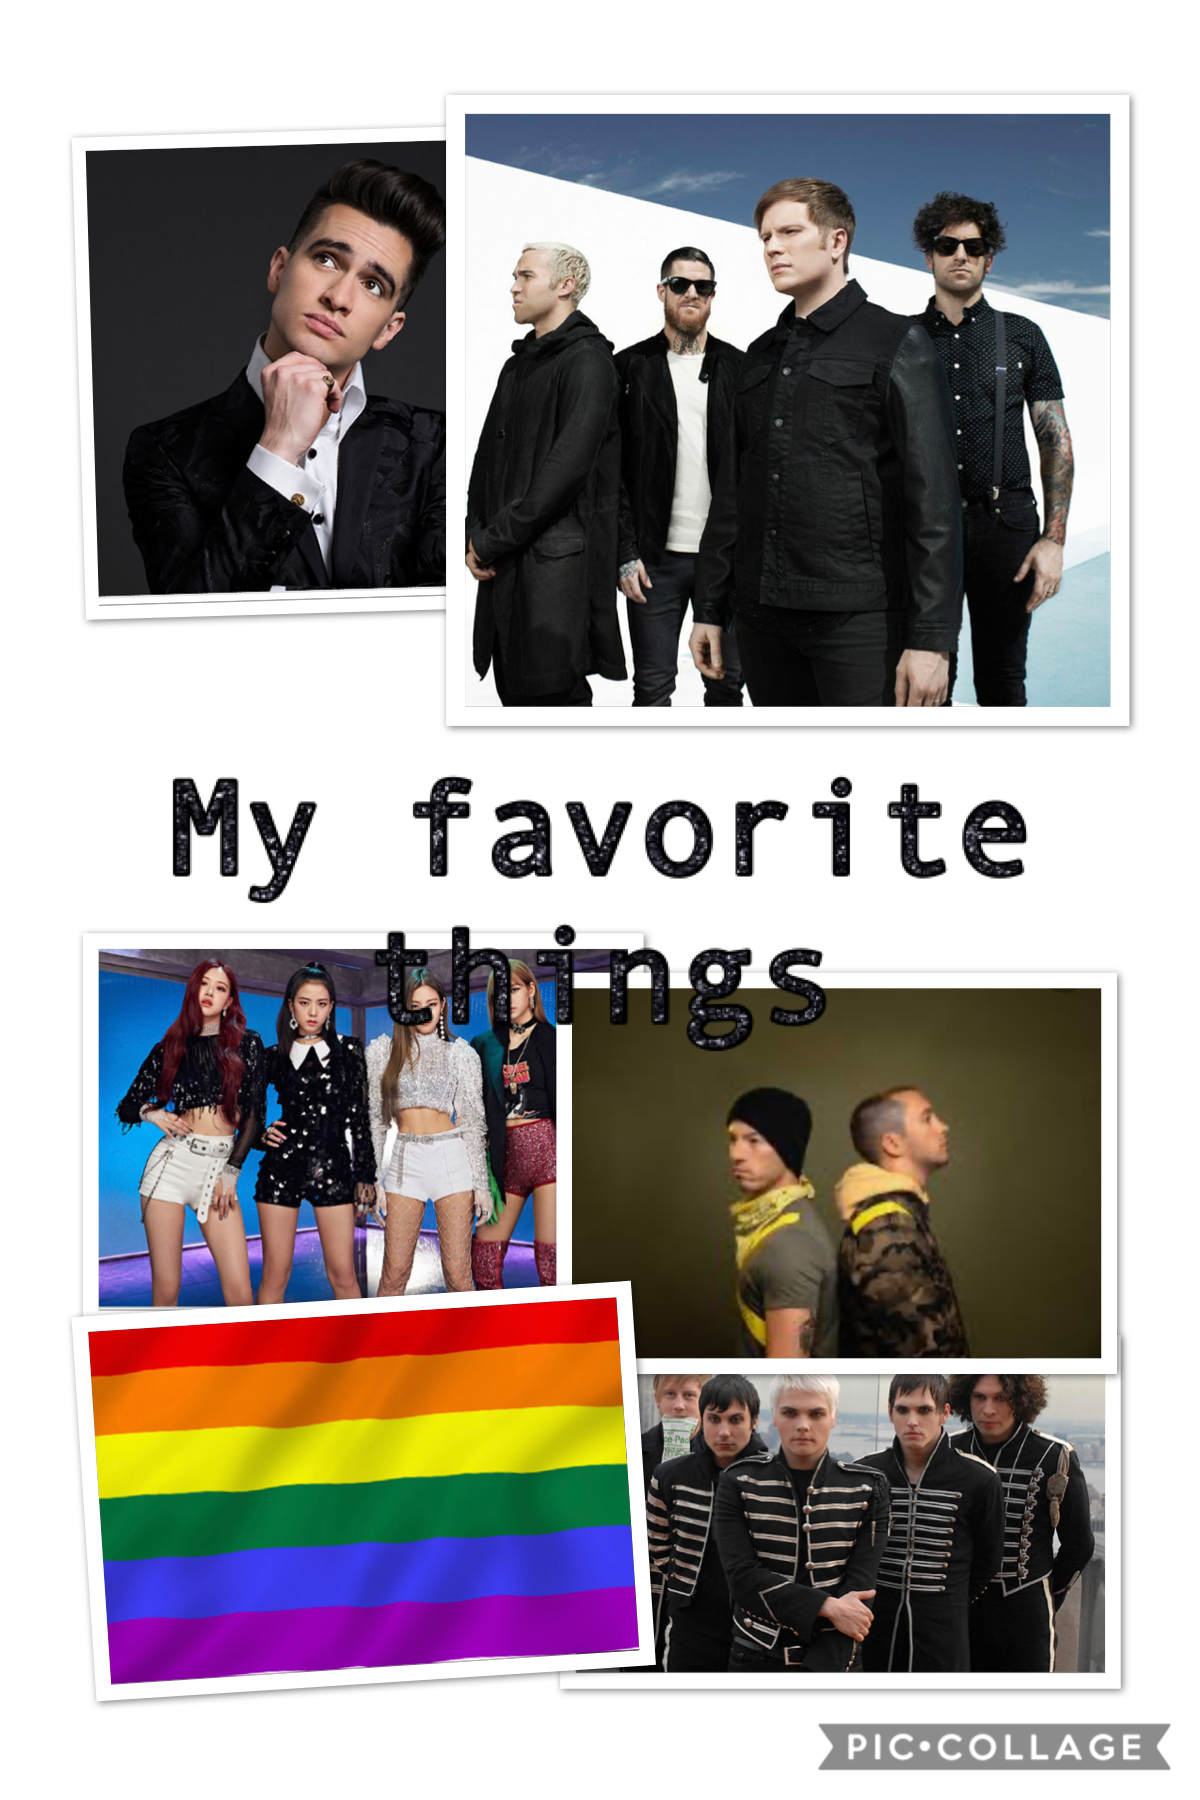 My favorite things are shown there blackpink, twenty one pilots, my chemical romance, panic at the disco, fall out boy, and finally PRIDE!